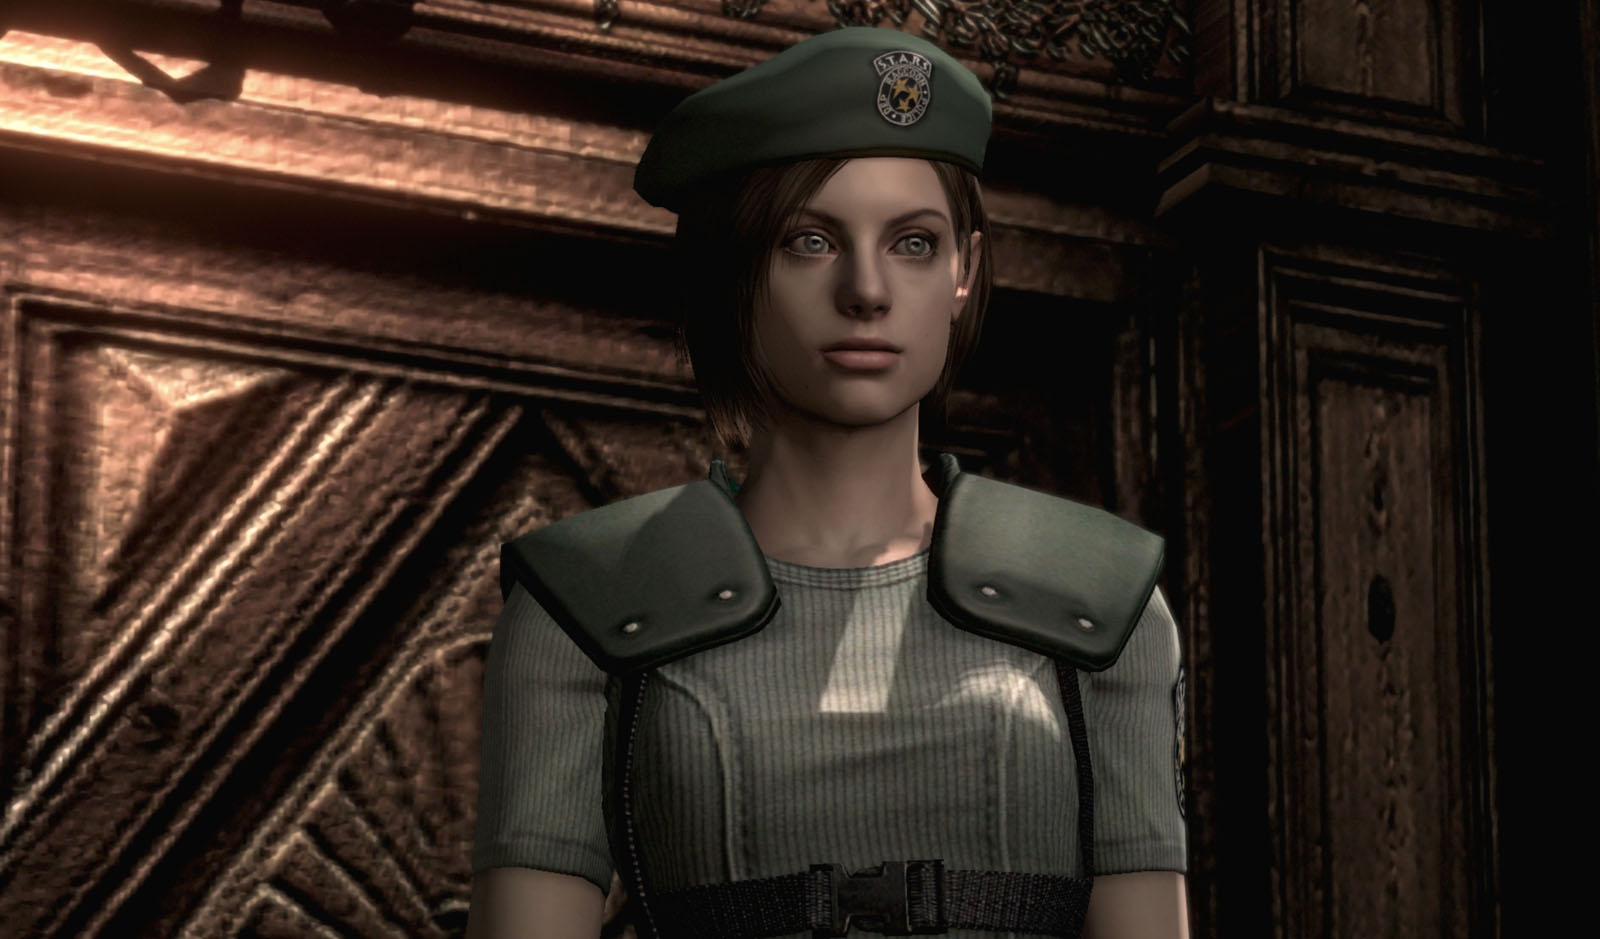 jill-valentine-from-the-resident-evil-series-game-art-hq